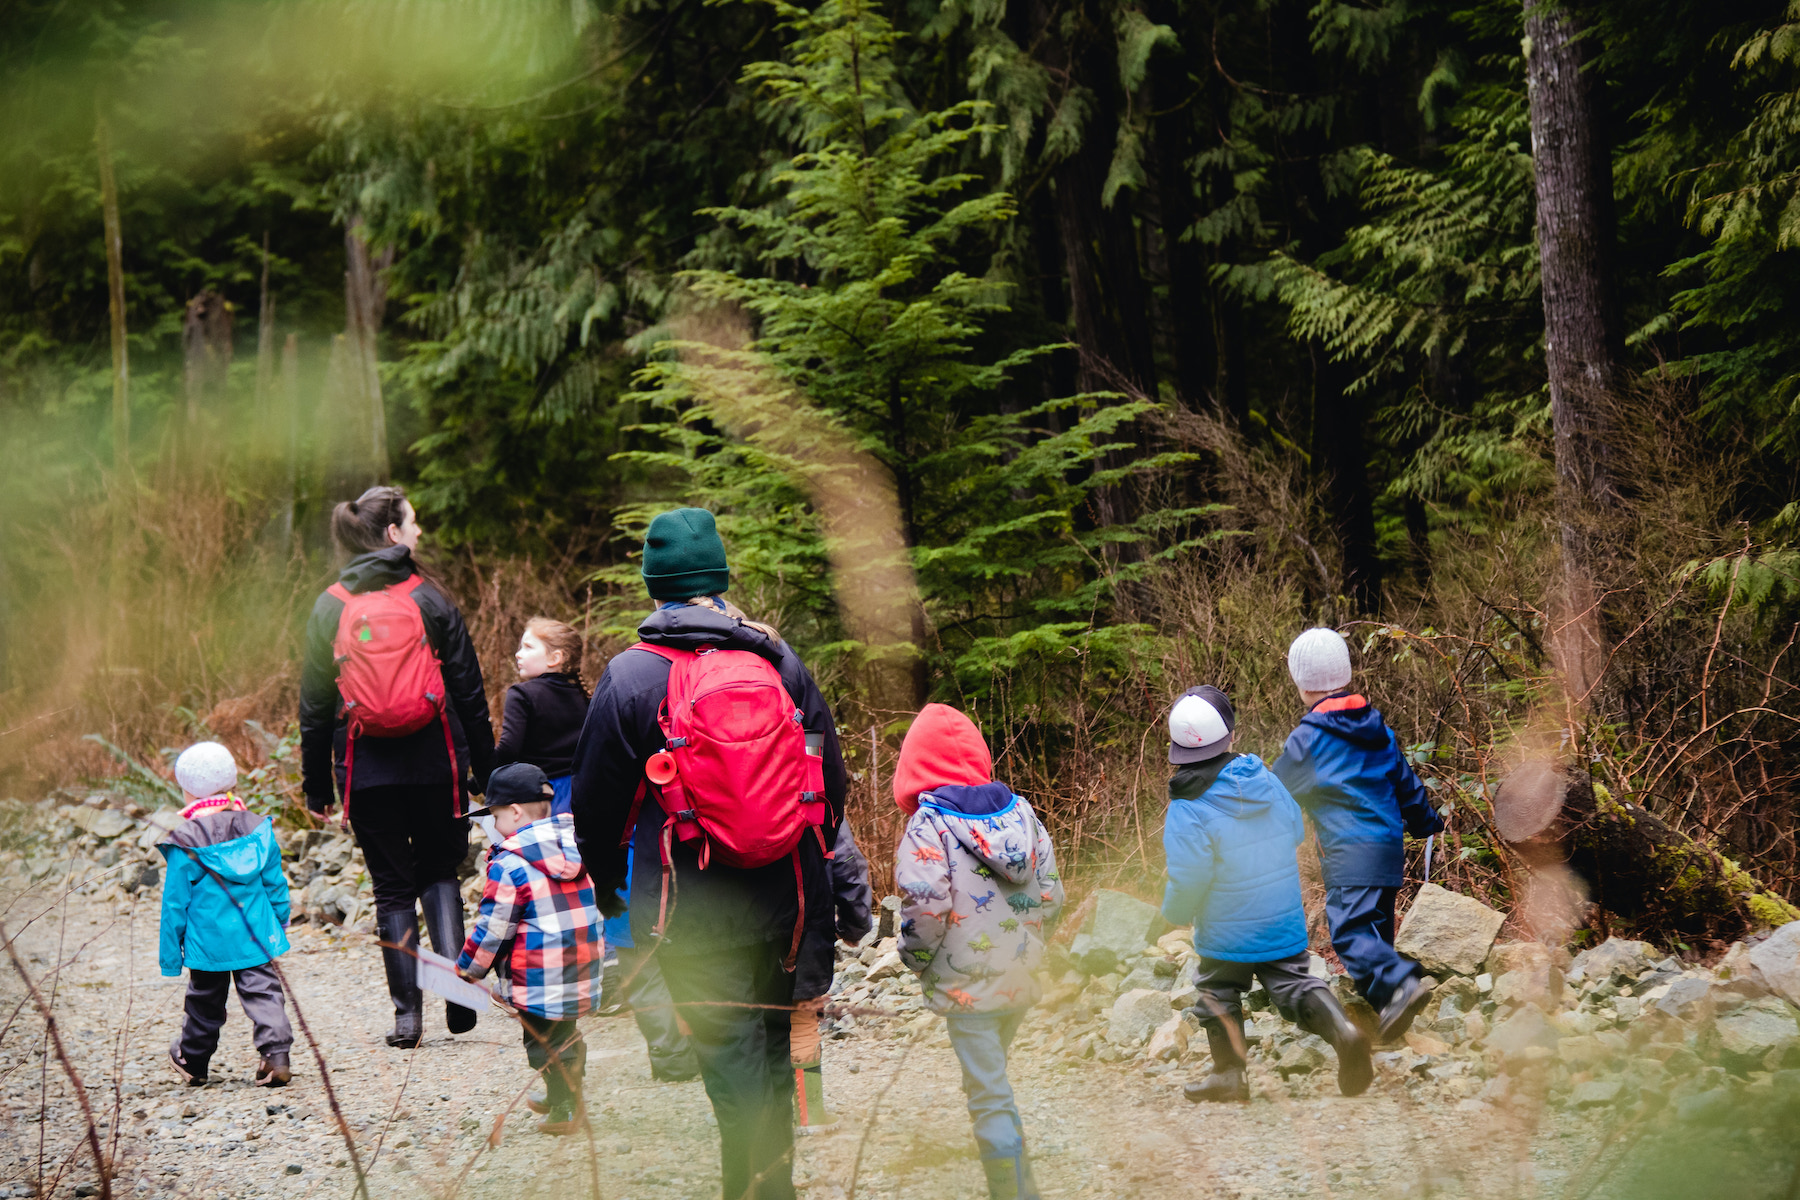 Group of kids at forest school walking on forest path